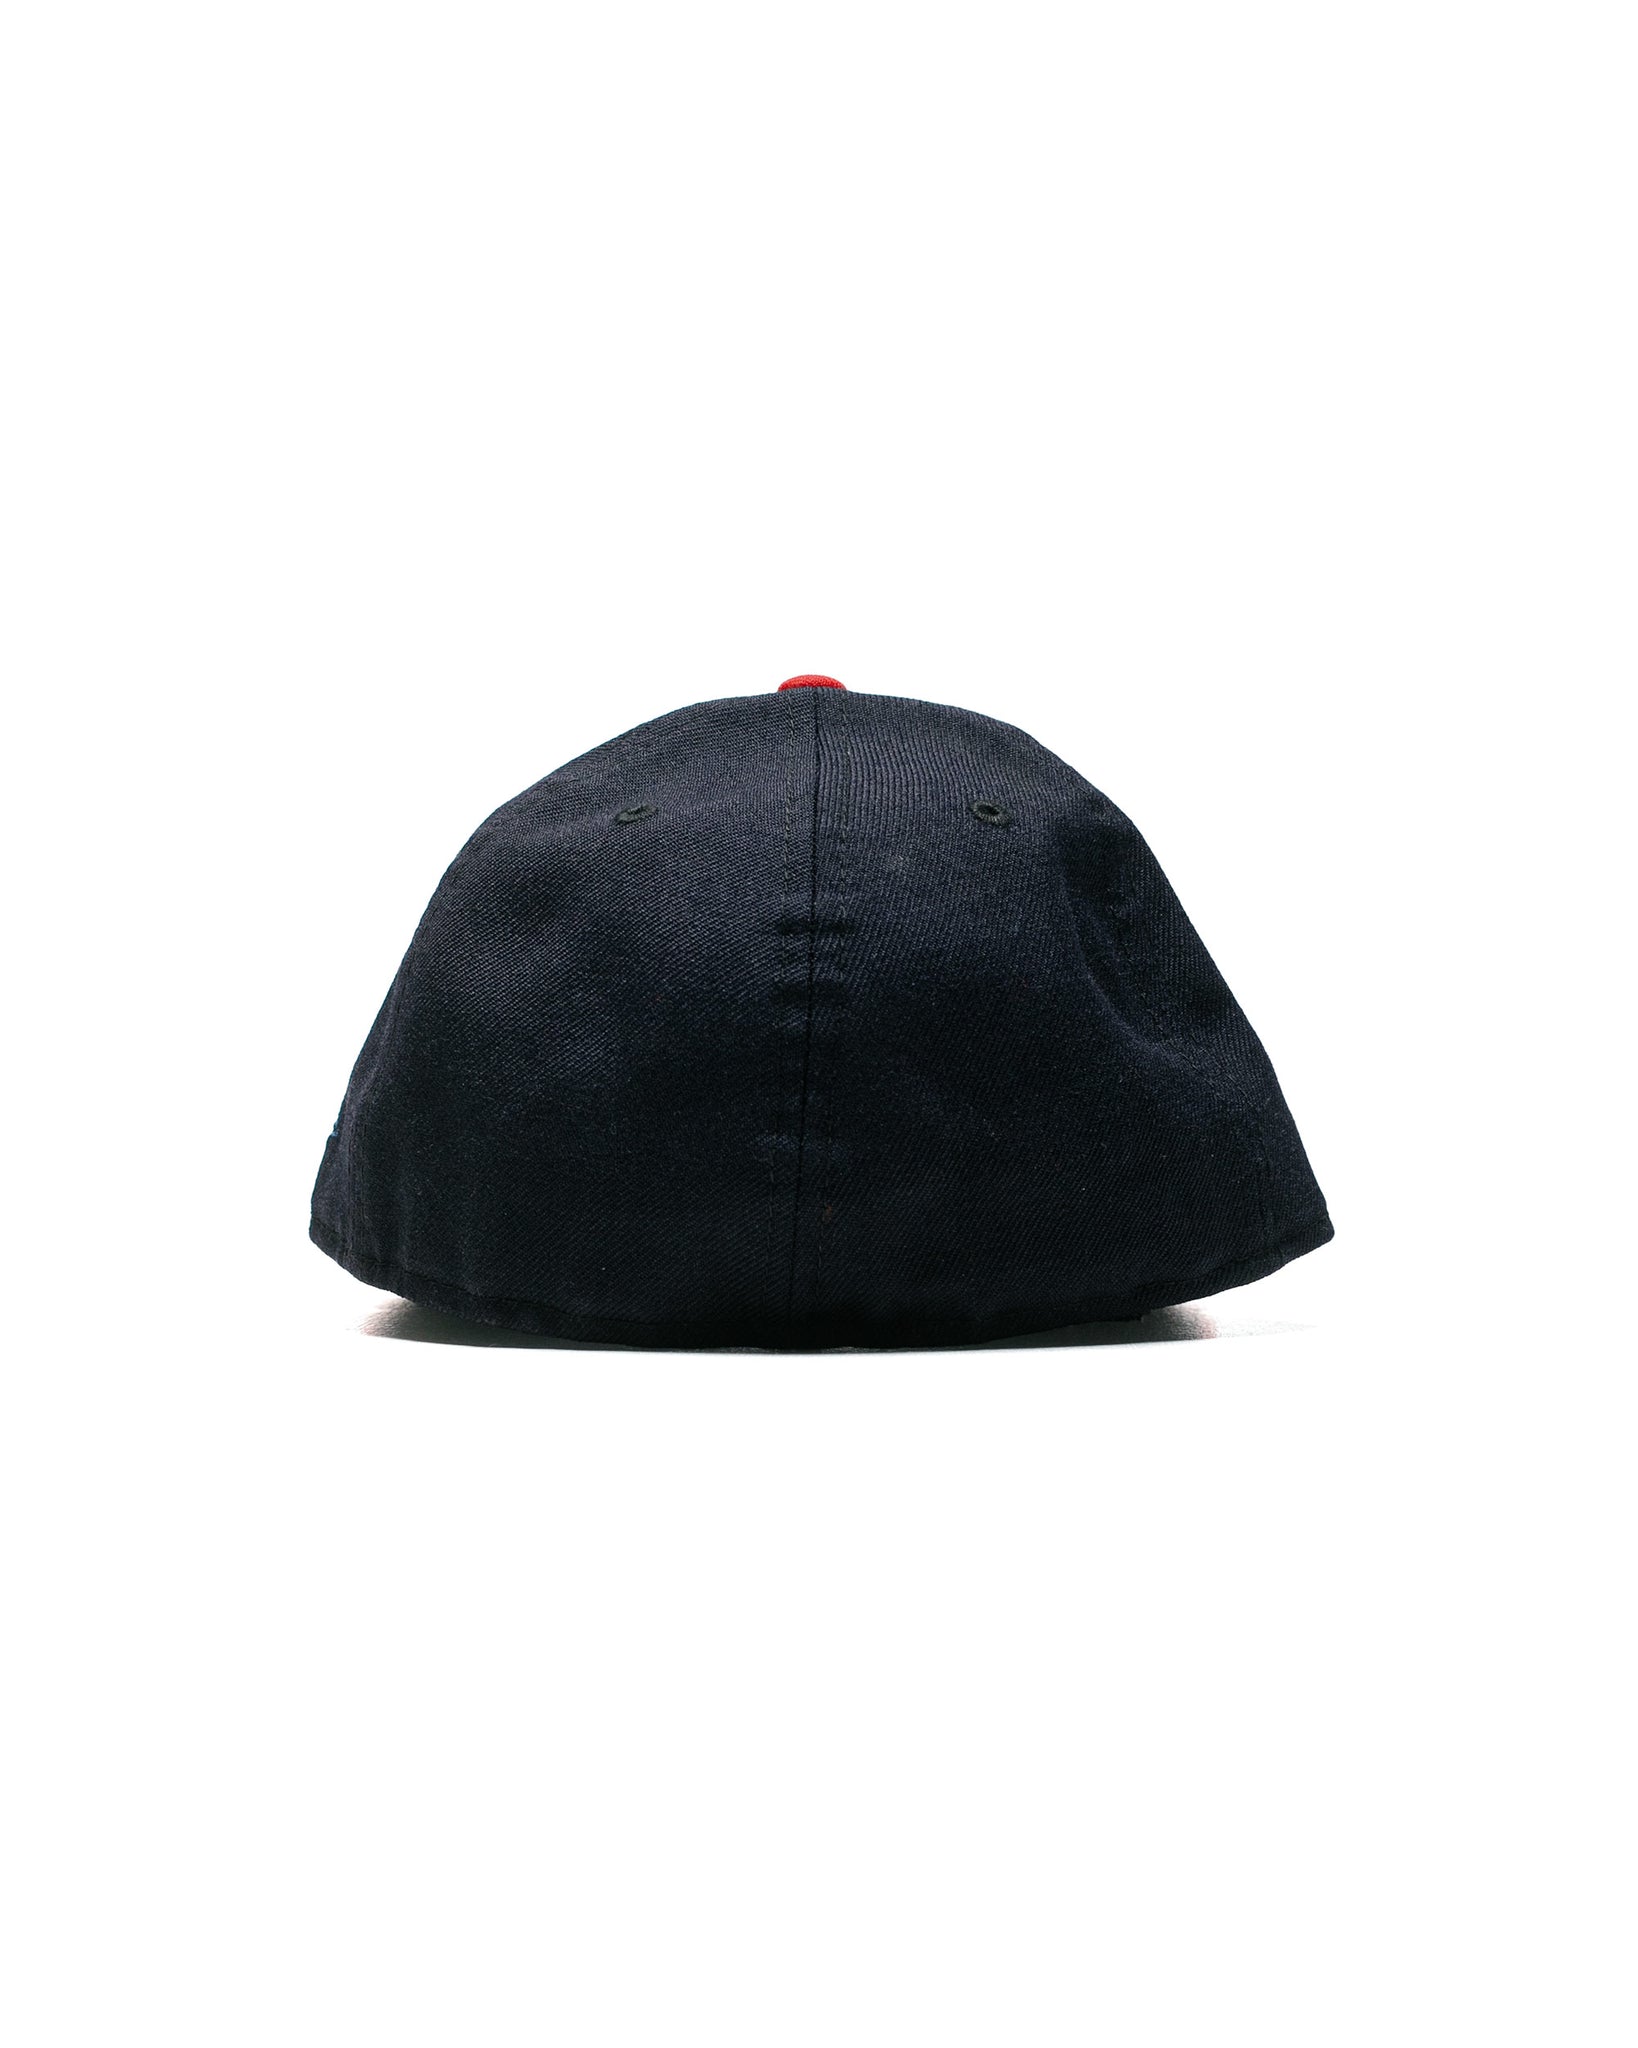 Lost & Found x New Era Low Profile 59FIFTY Cap NavyRed back